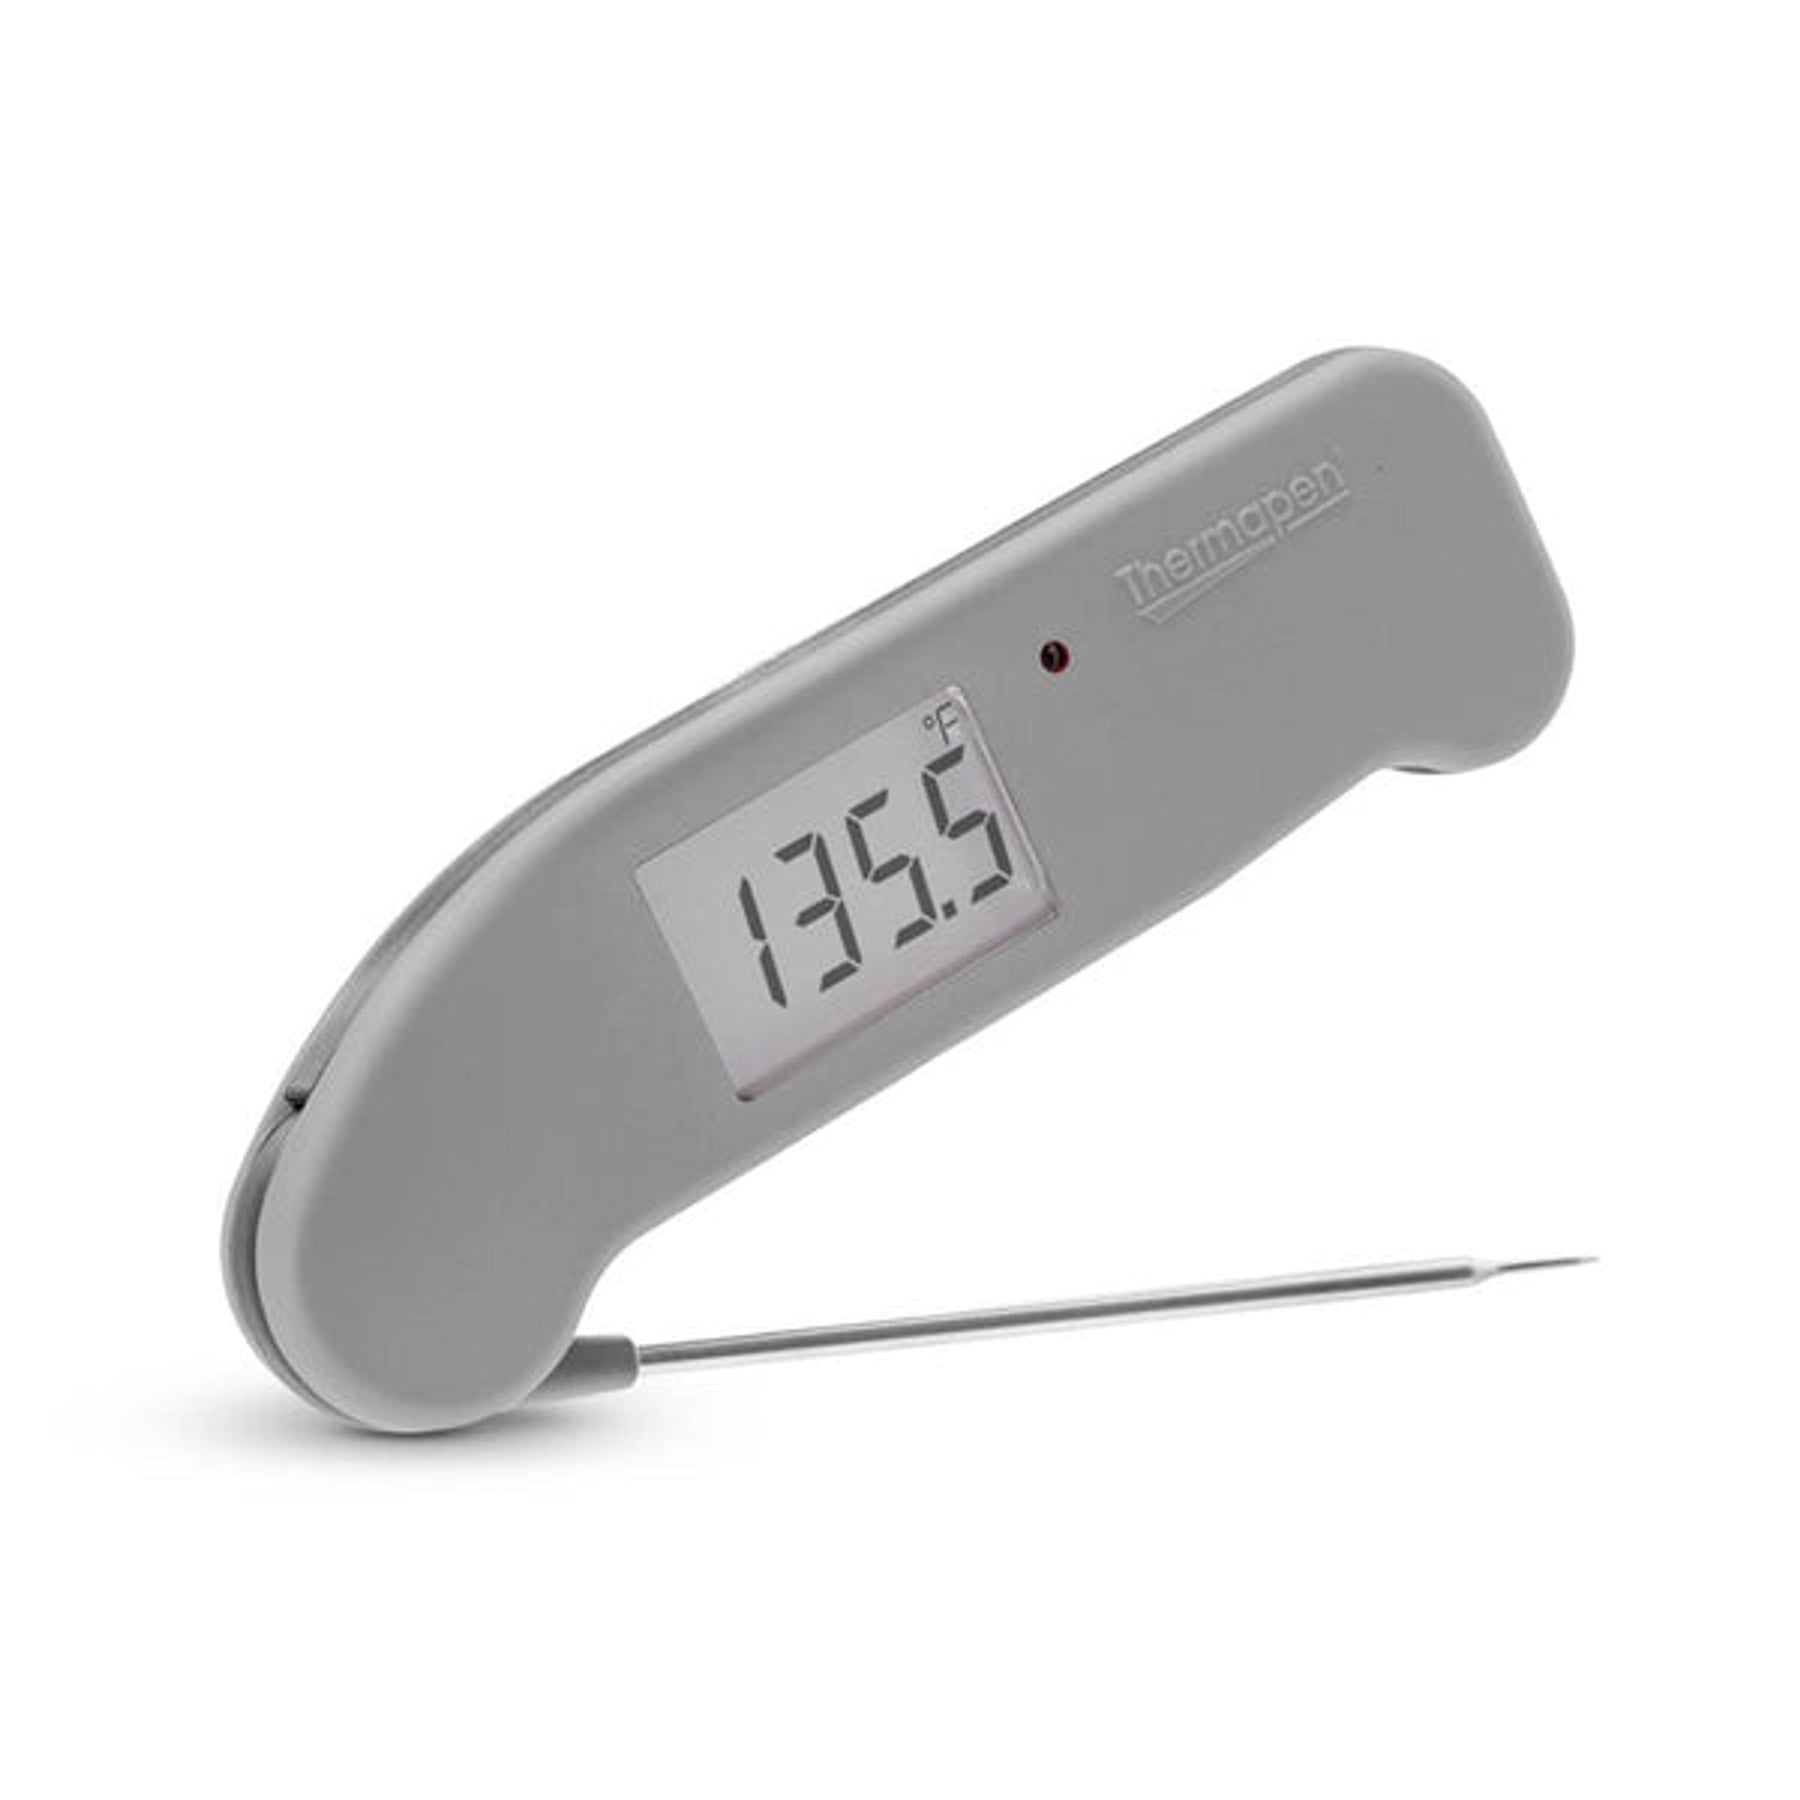 ThermoWorks Waterproof Thermapen One | One Second Instant Read Meat Thermometer | Auto-Rotating Display, Waterproof | Grey 5338679